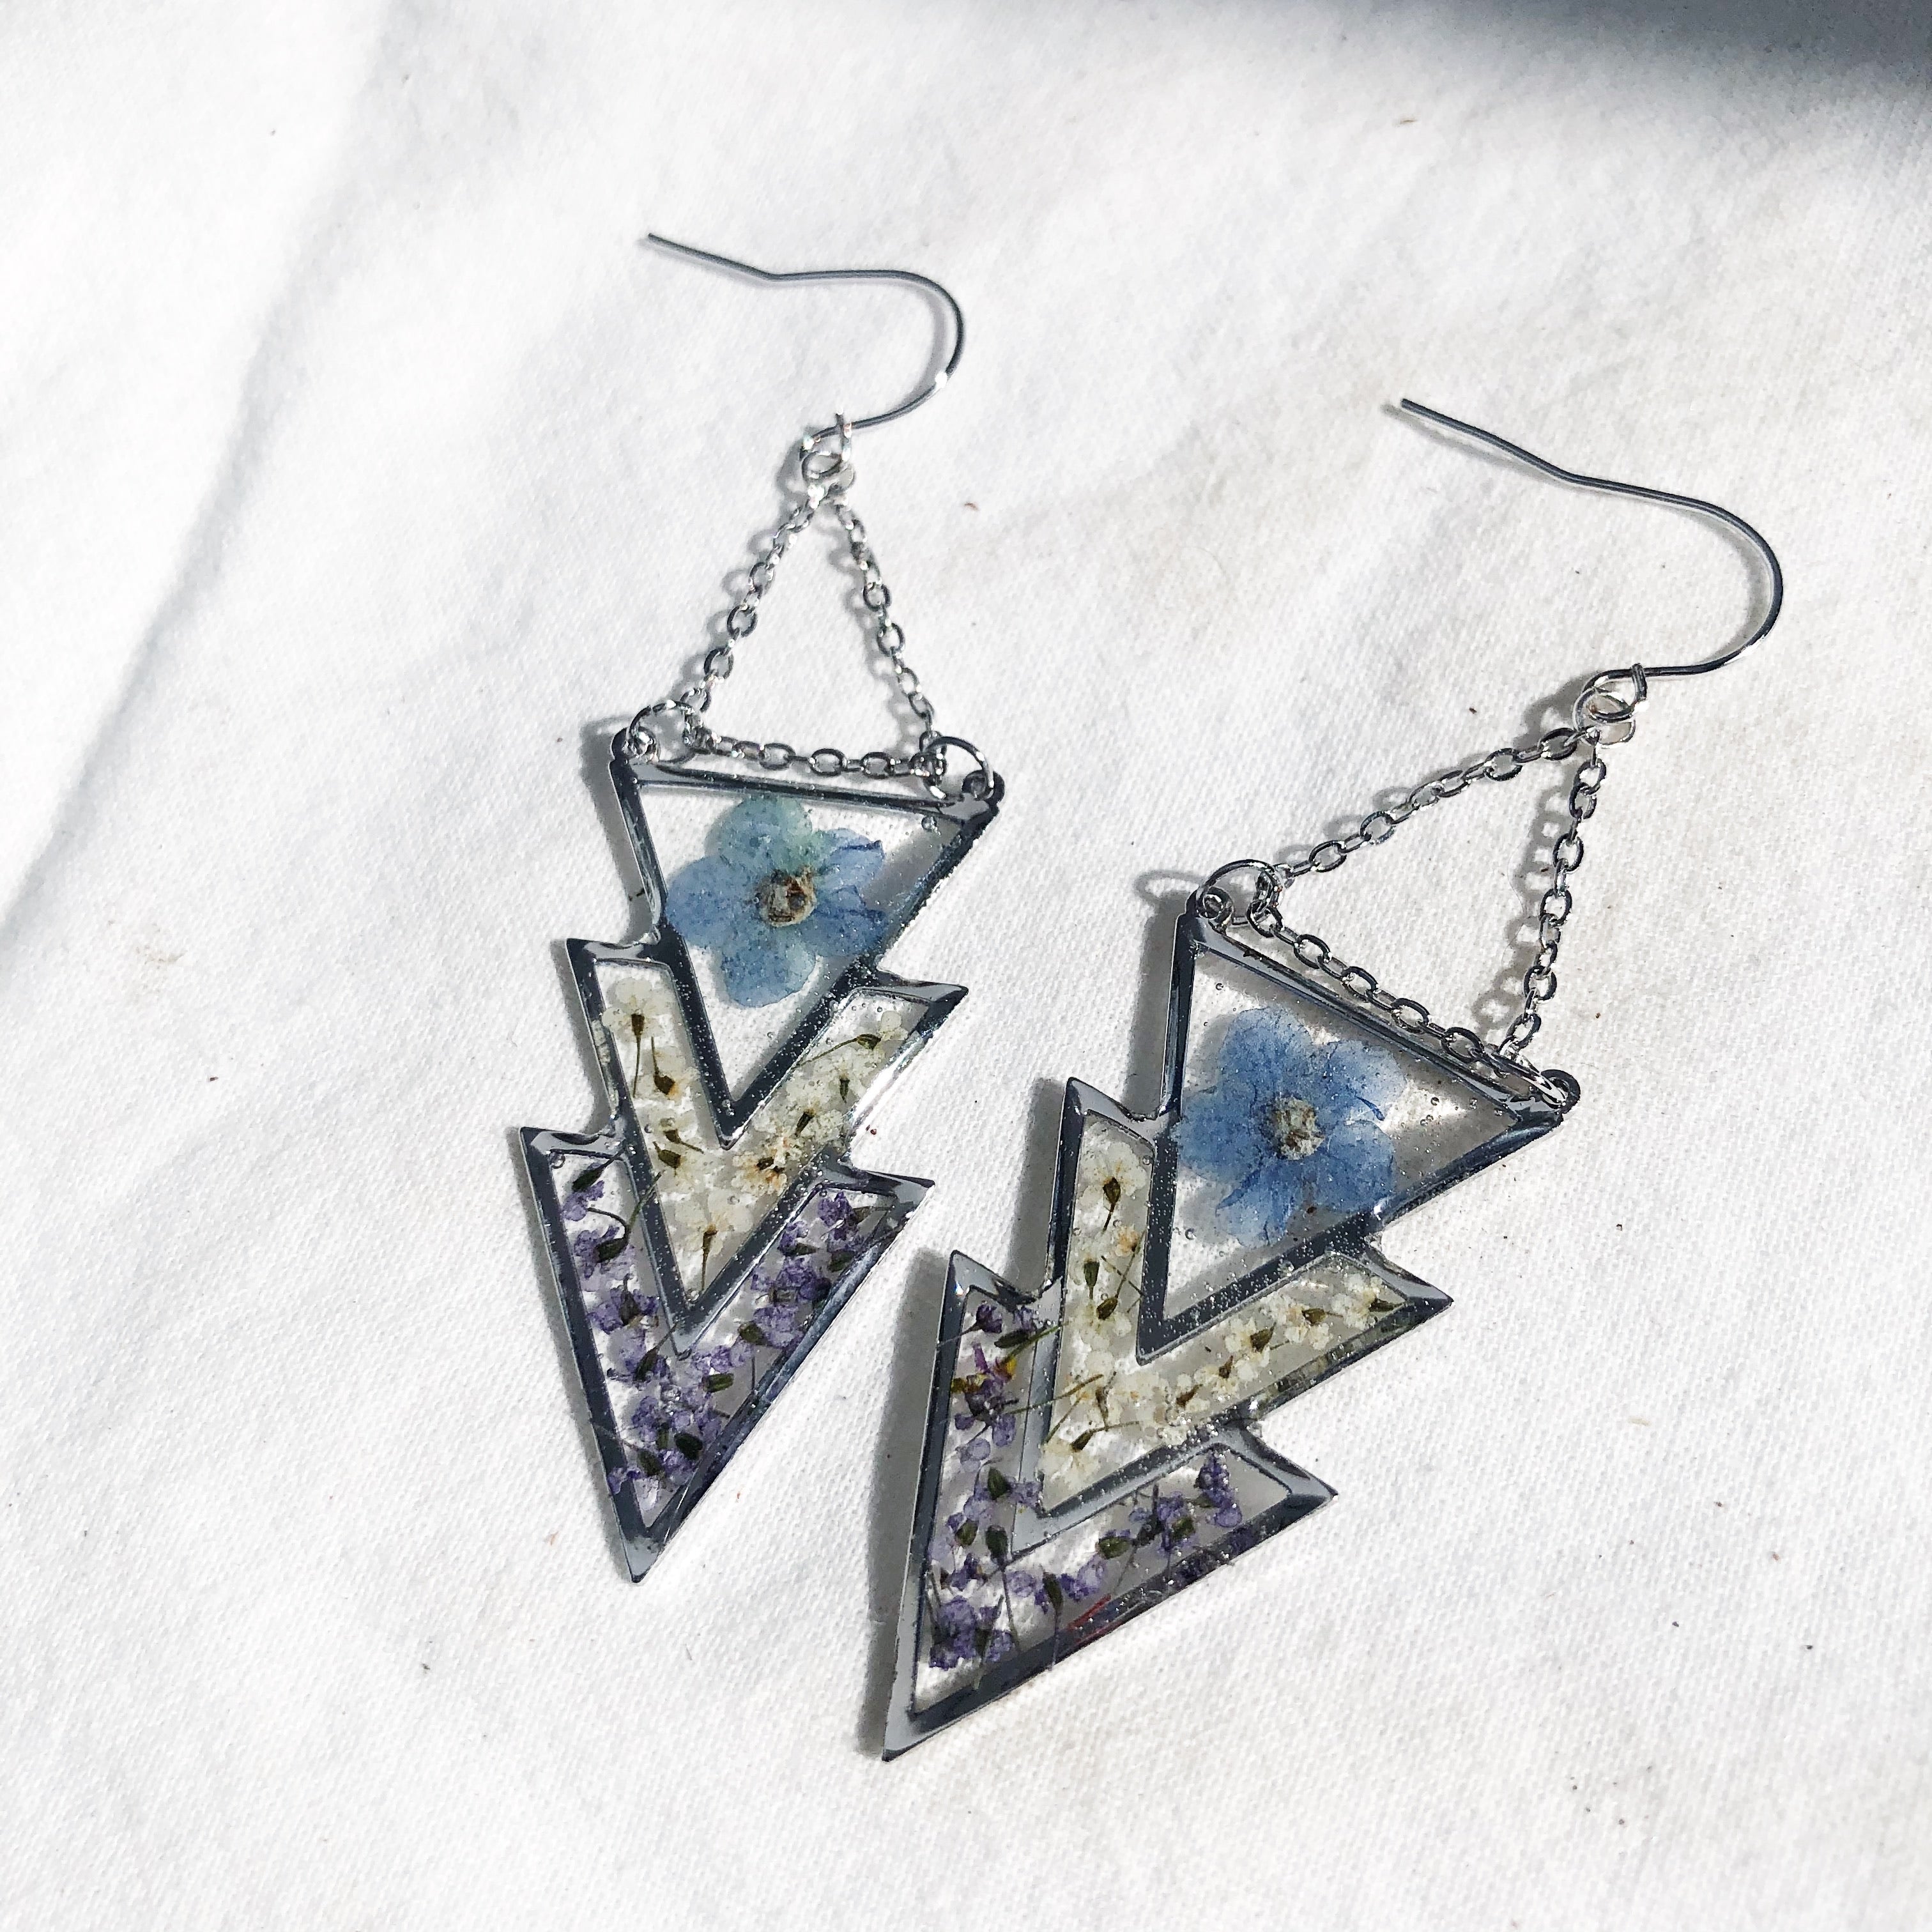 Reyna - Silver Triangle Chain Earrings with Pressed Flowers